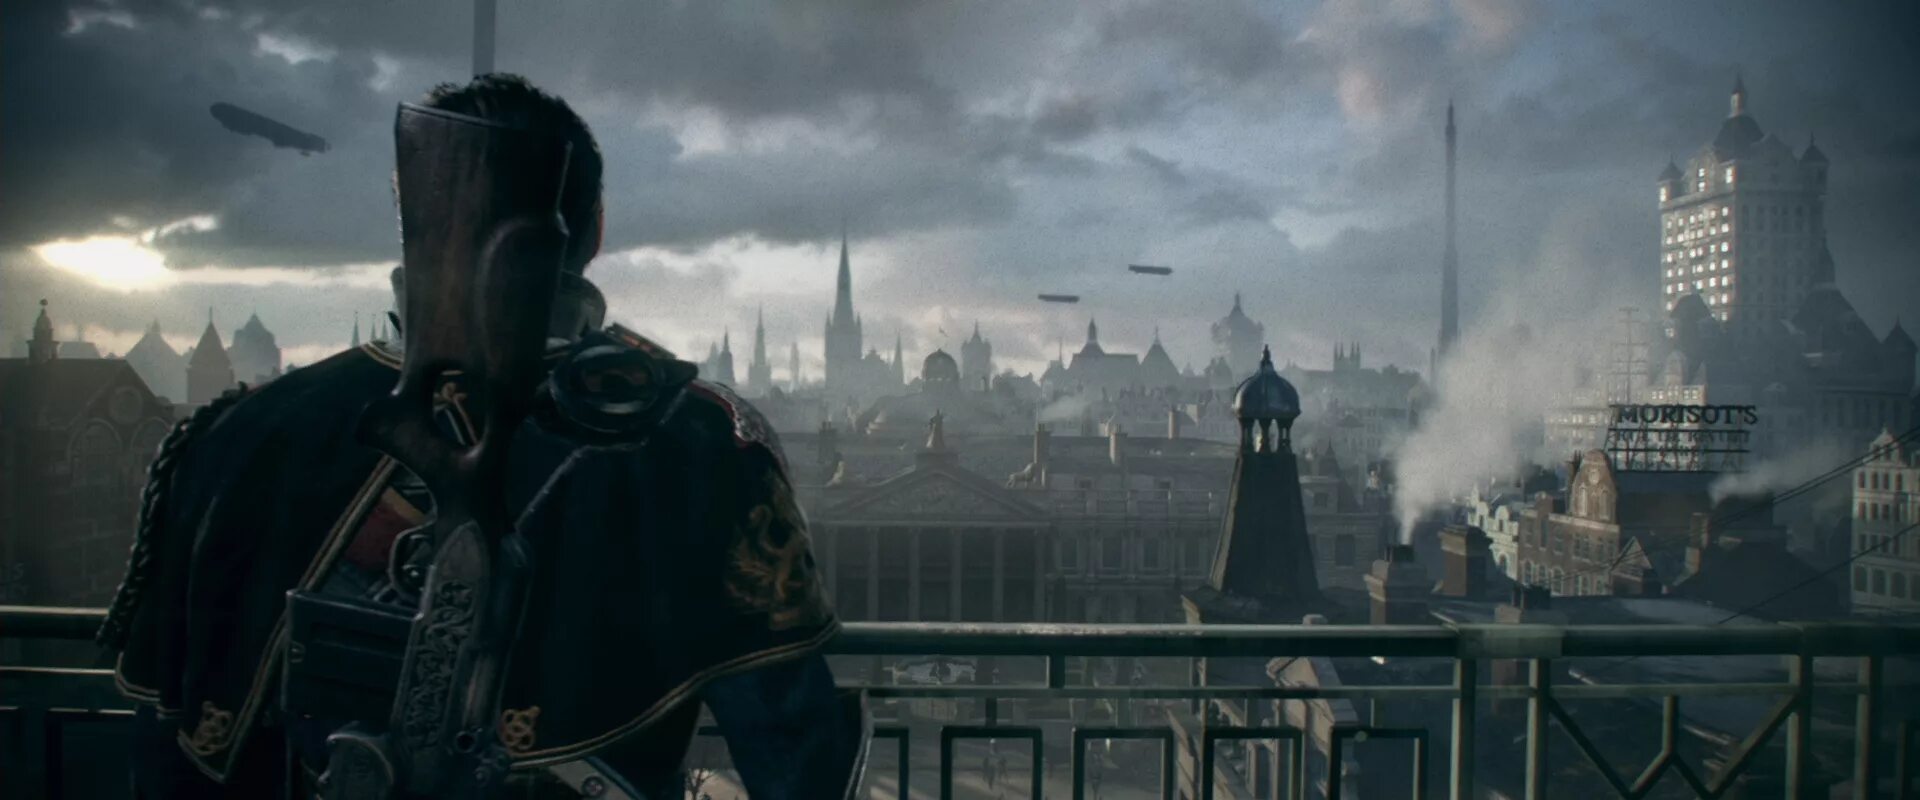 The order: 1886. Орден 1886 (ps4). Order 1886 ps4. The order 1886 геймплей.